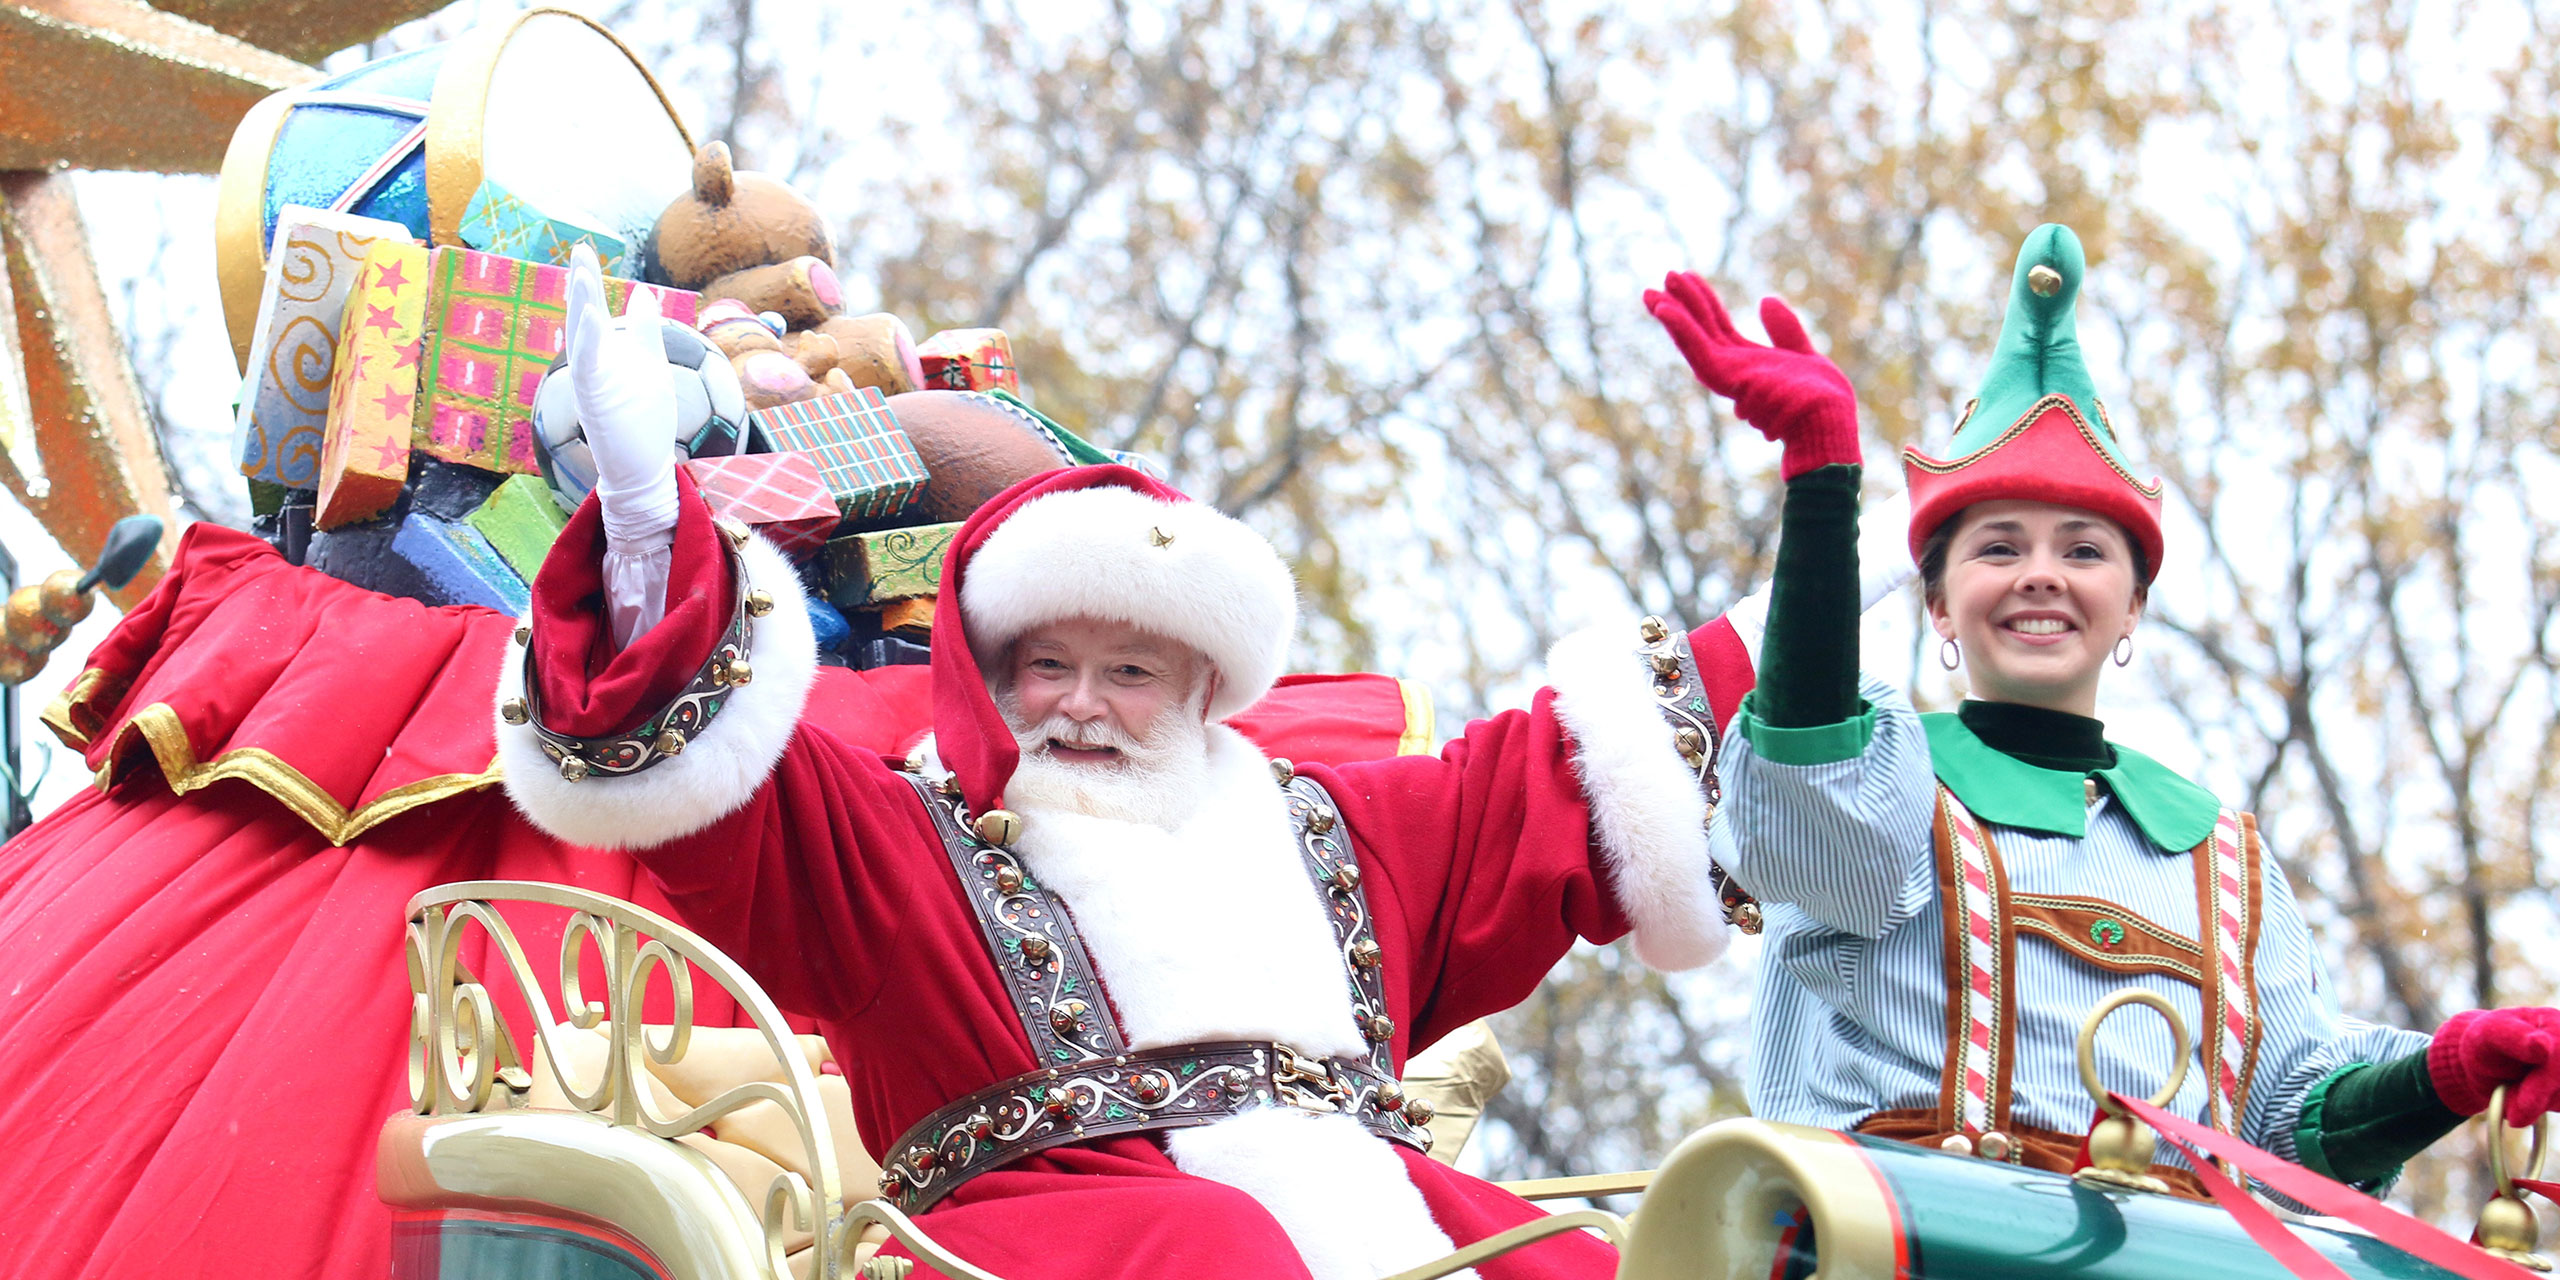 Santa Claus at the Macy's Thanksgiving Day Parade; Courtesy of JStone/Shutterstock.com